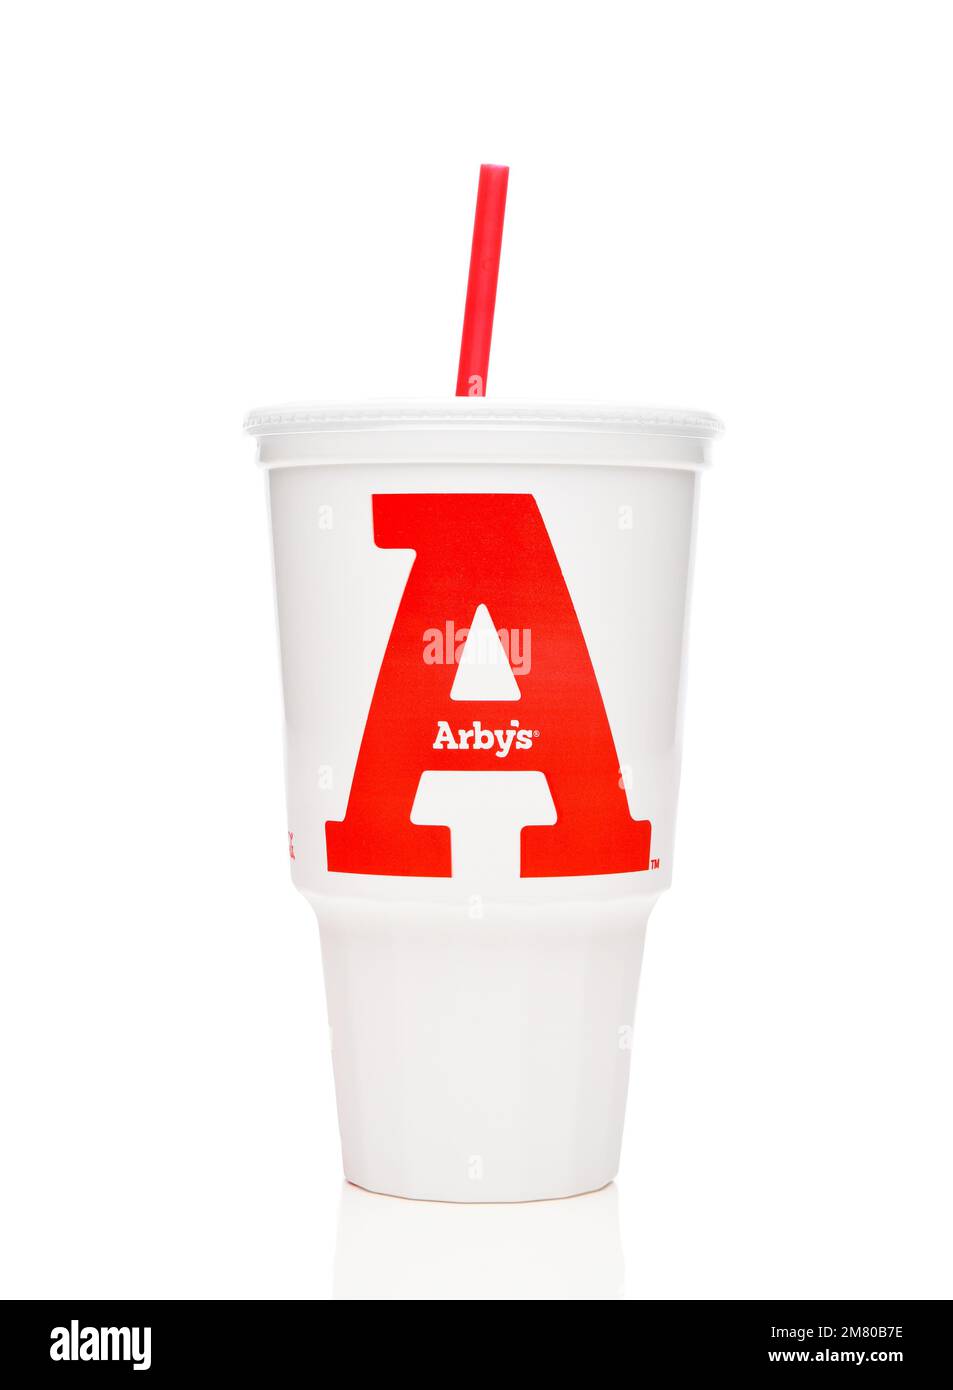 IRVINE, CALIFORNIA - 5 JAN 2023: Arbys Drink Cup, from the American fast food sandwich restaurant. Stock Photo